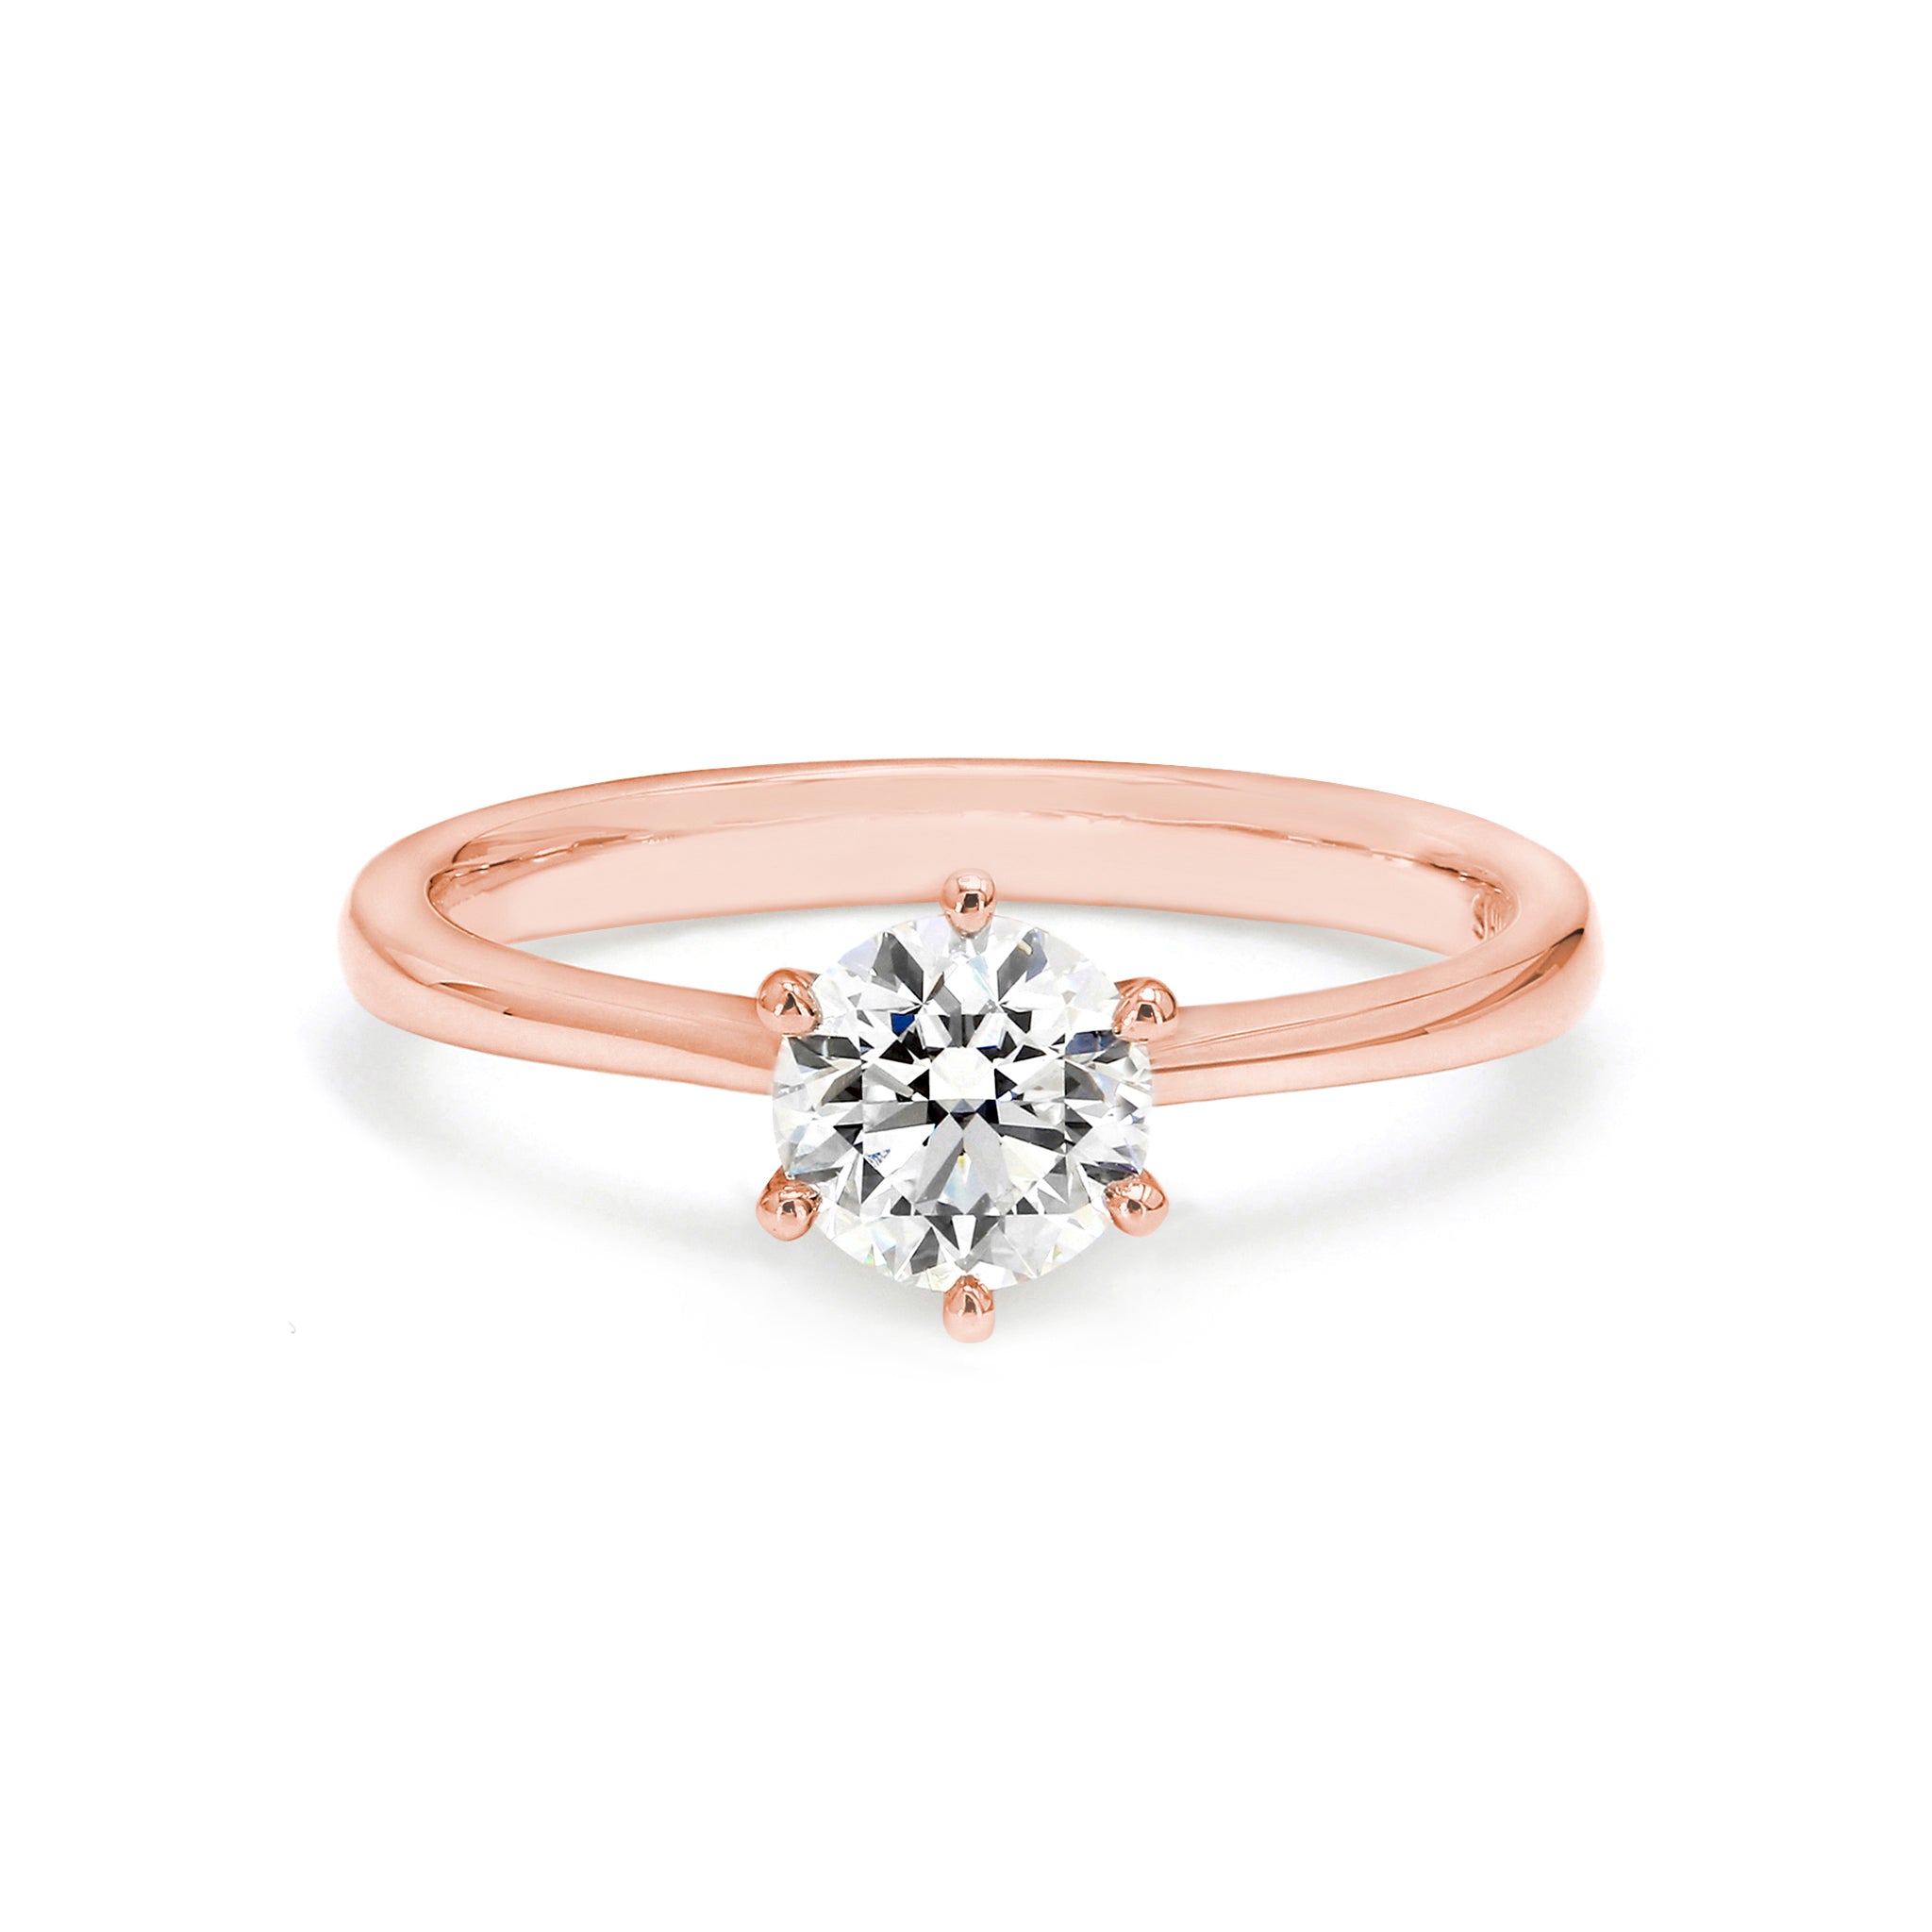 Shimansky - 6 Claw Classic Solitaire Diamond Ring 0.40ct crafted in 18K Rose Gold